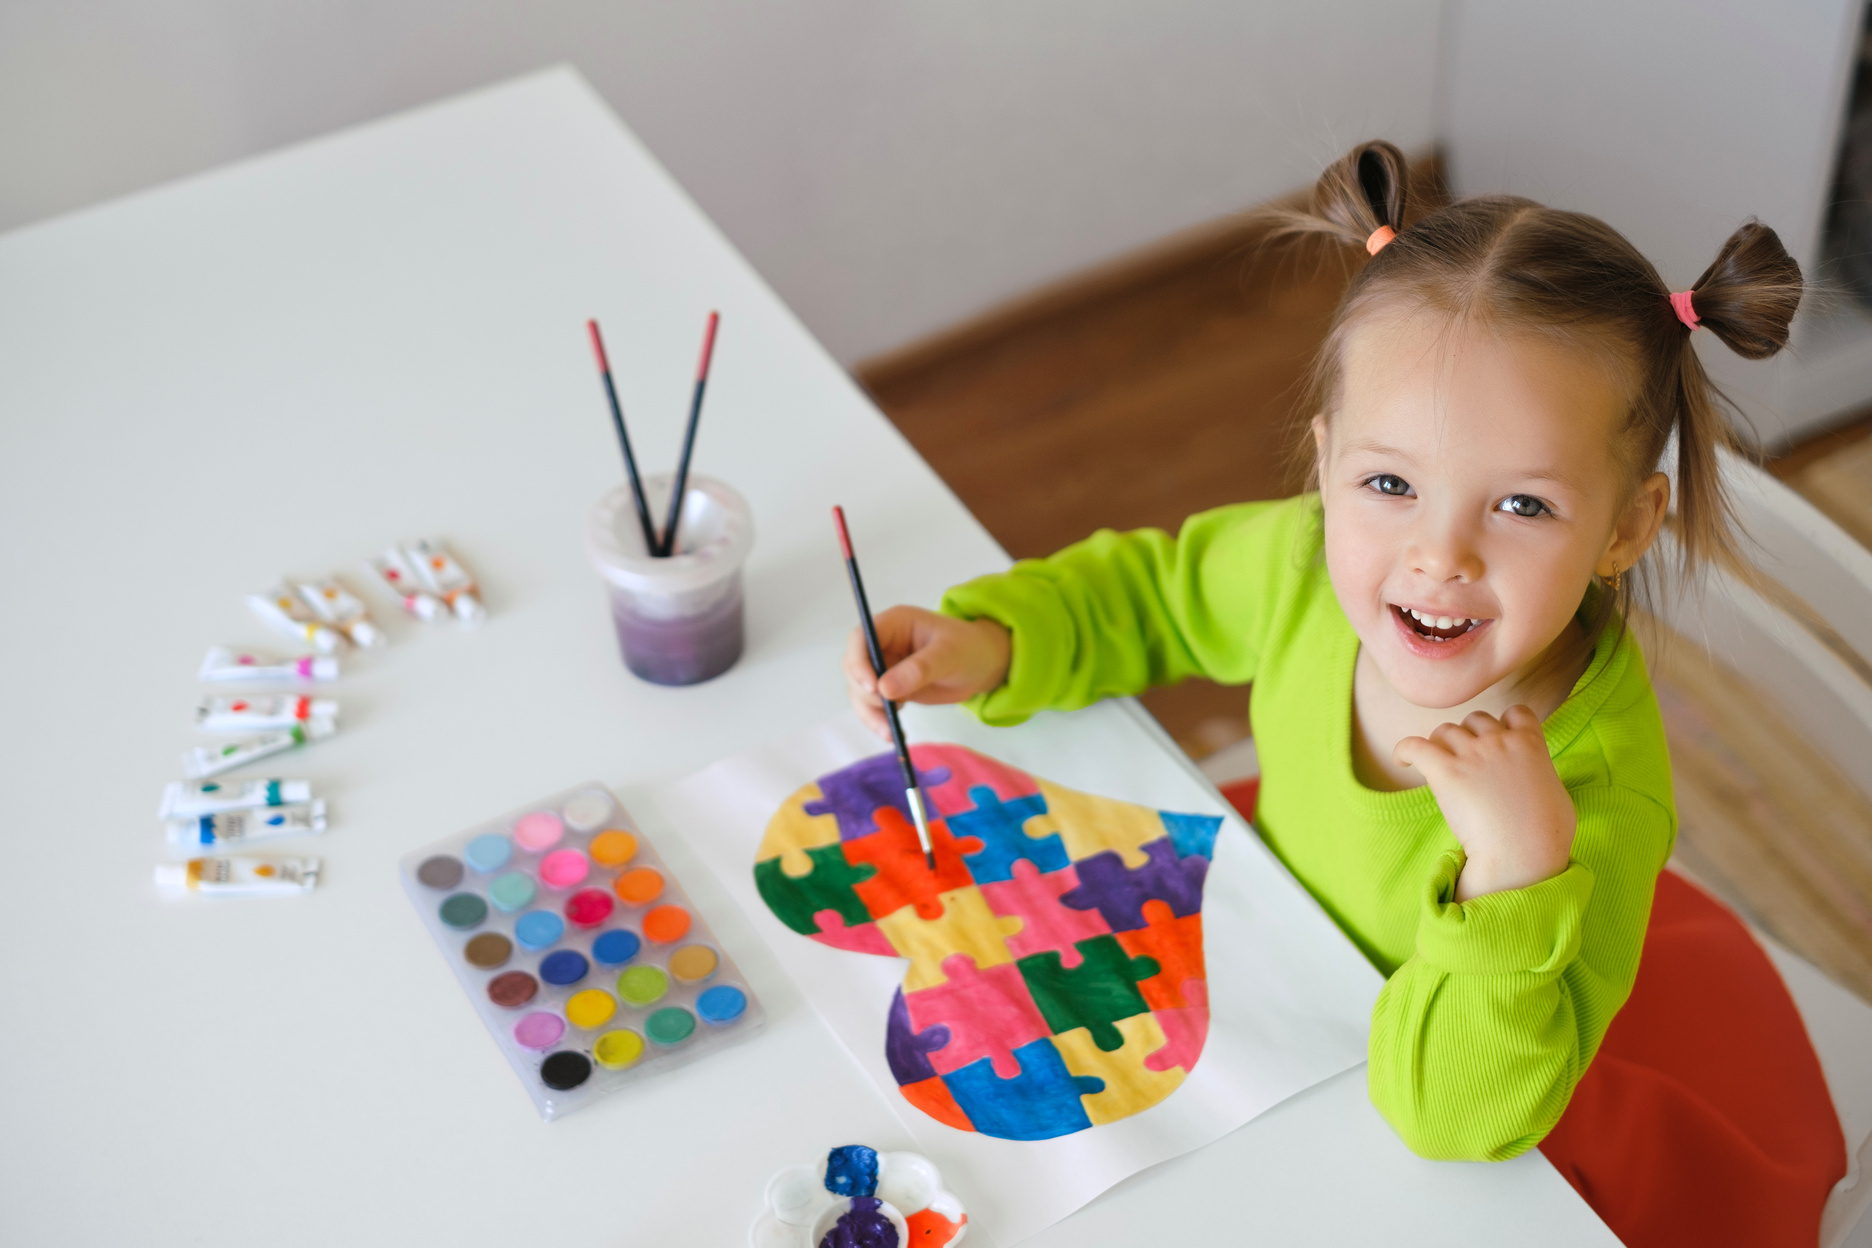 Girl Painting Puzzle